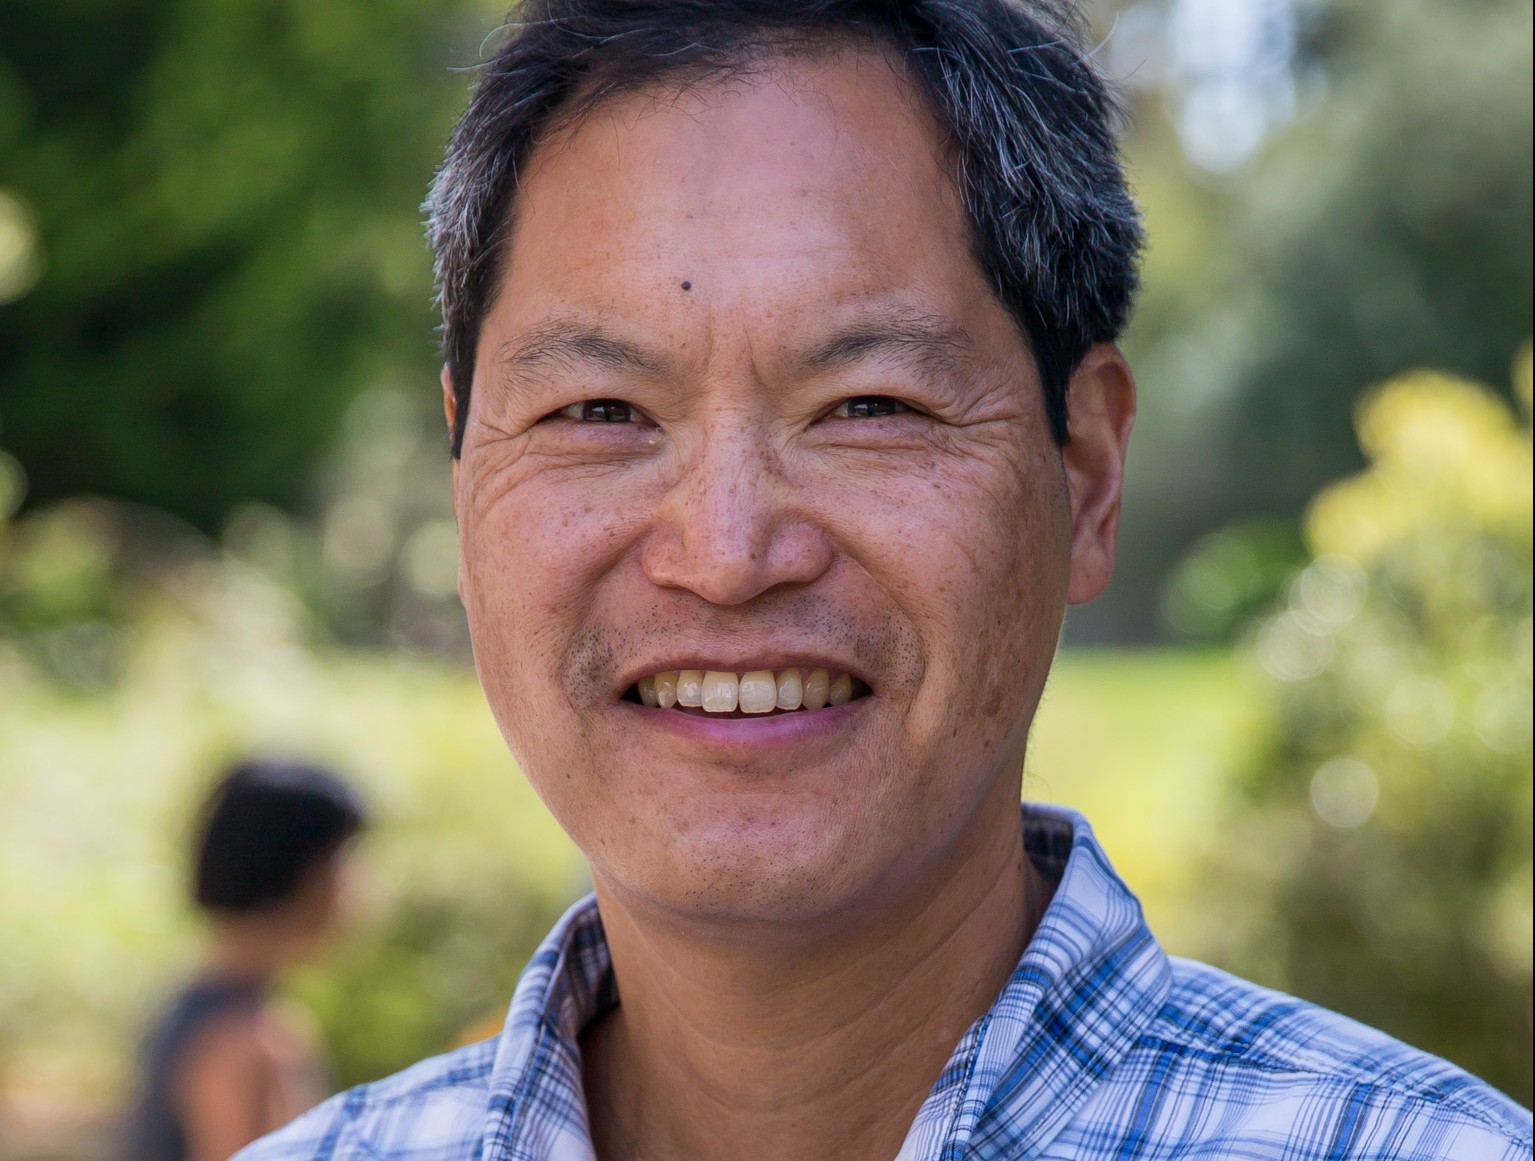 Dr. Russell Jeung